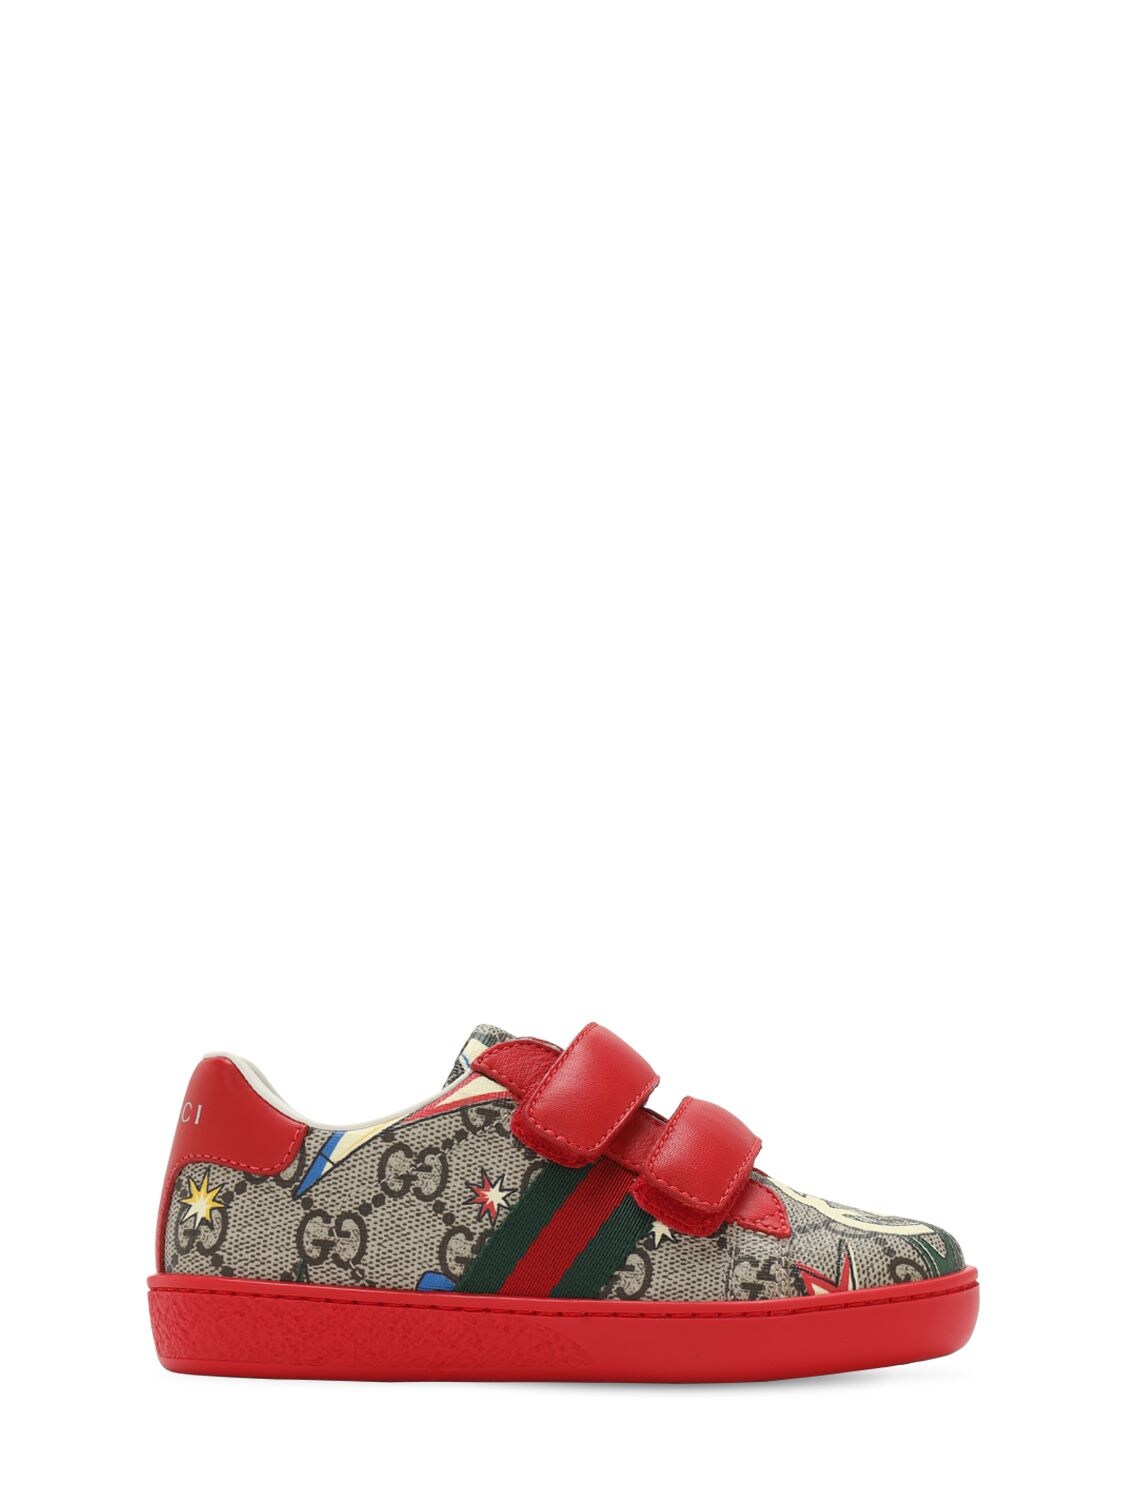 GUCCI NEW ACE STRAP SNEAKERS,72IFHB014-ODQ3MA2